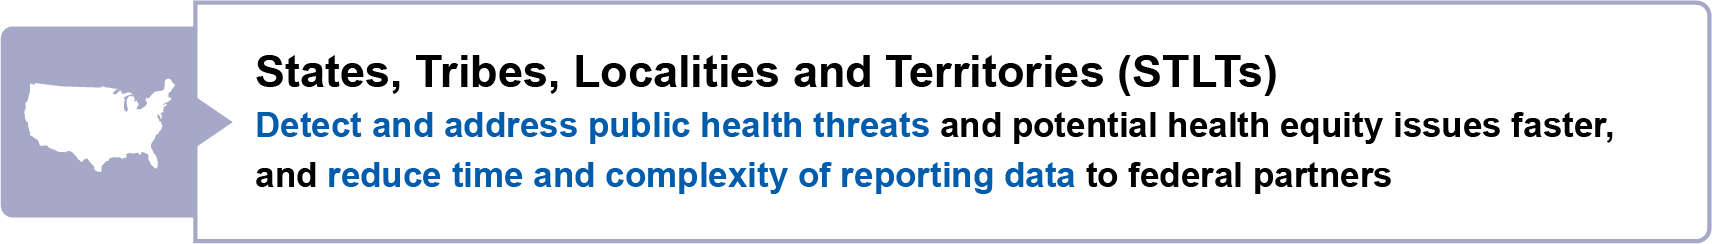 States, Tribes, Localities and Territories (STLTs): Detect and address public health threats and potential health equity issues faster, and reduce time and complexity of reporting data to federal partners